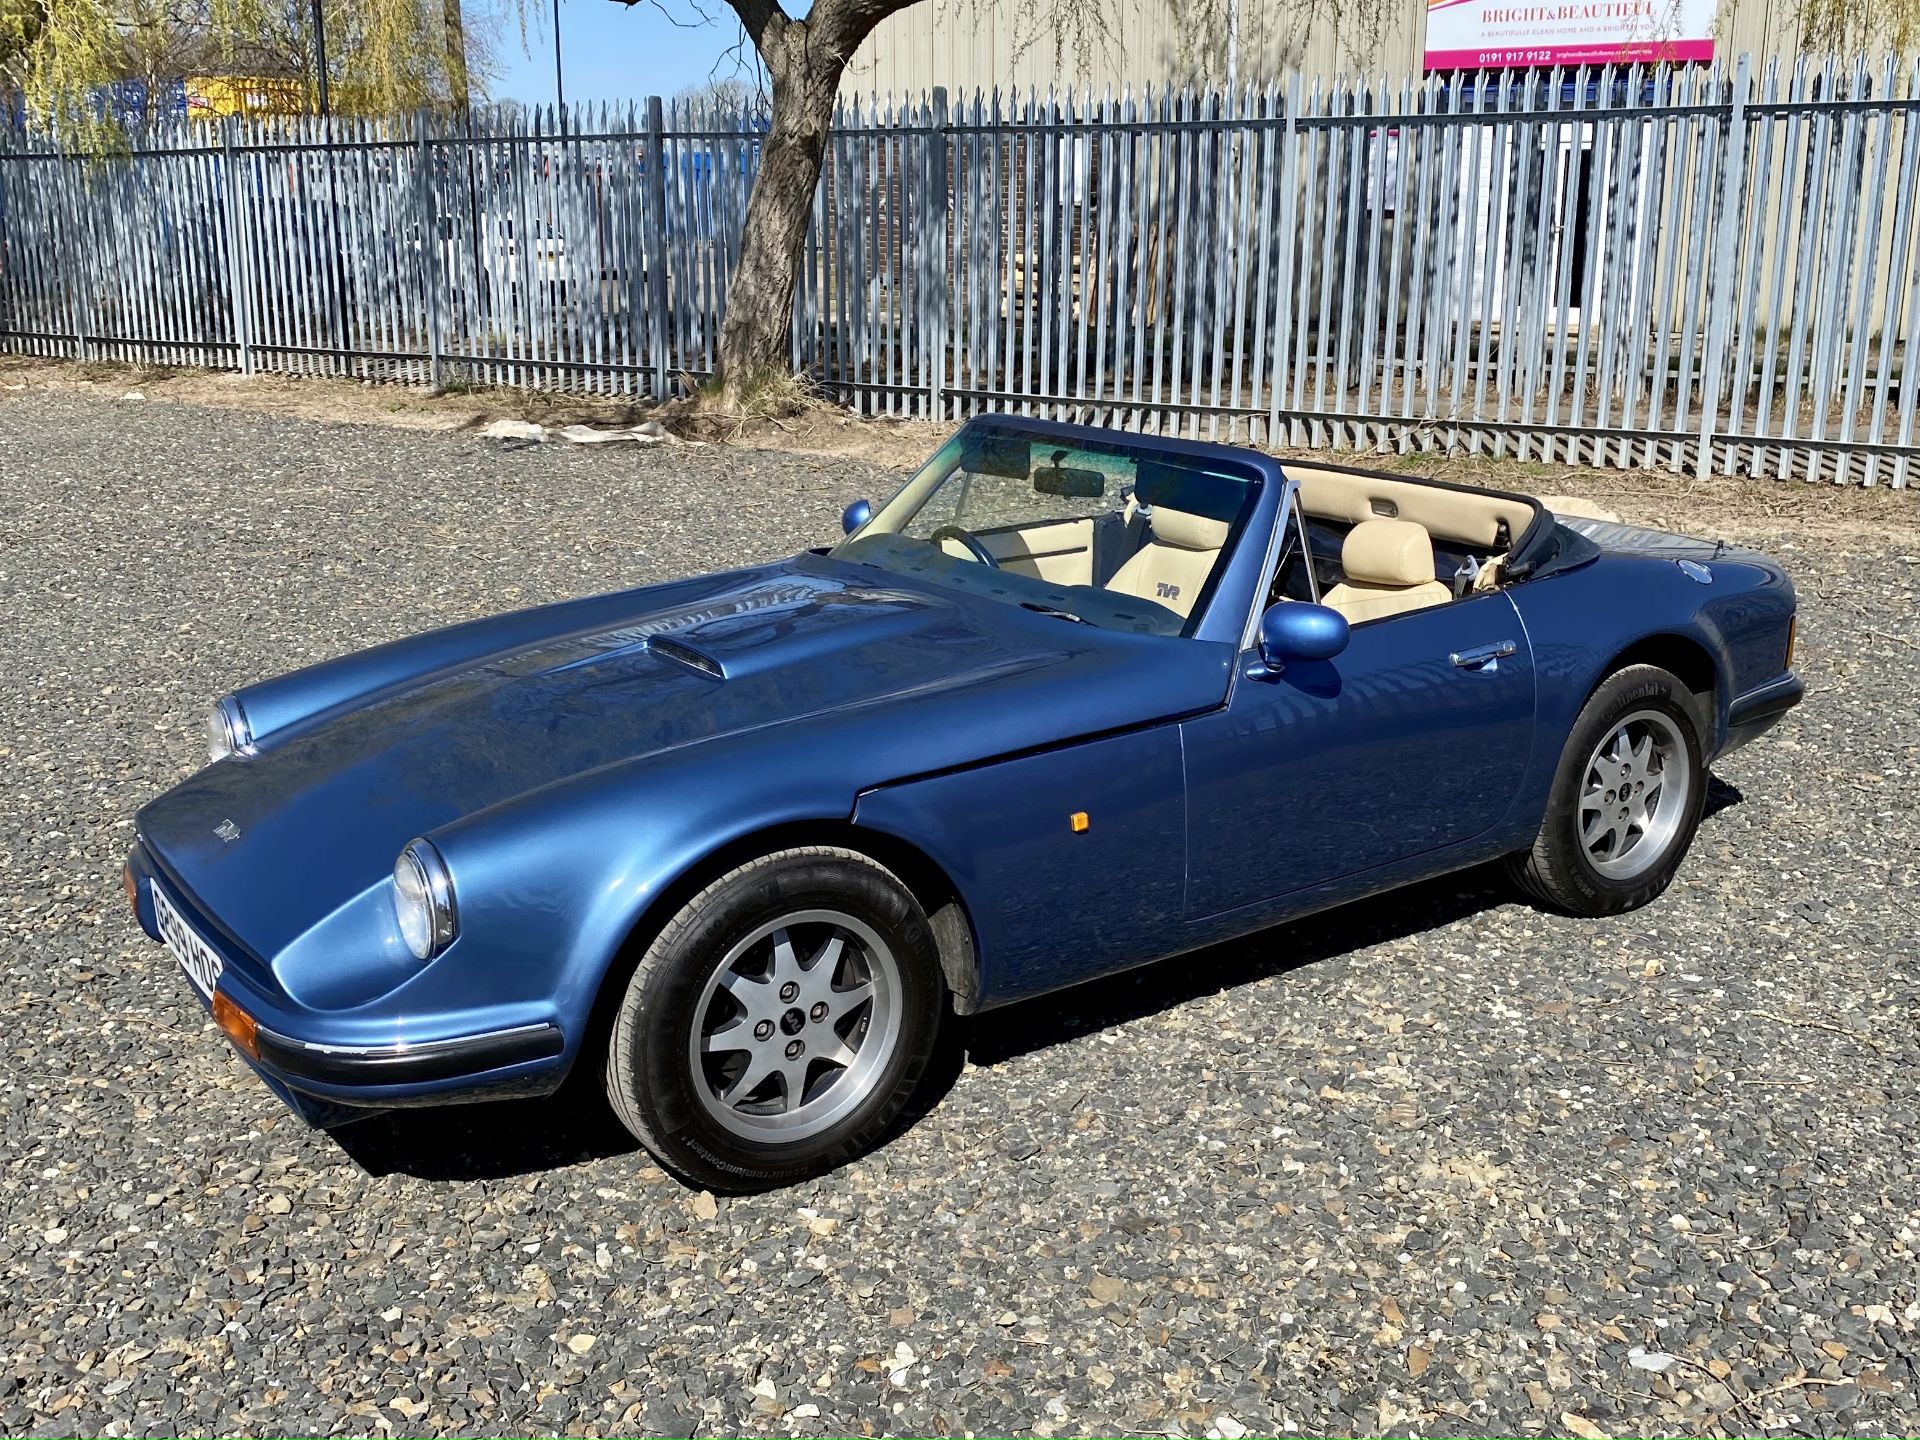 TVR S2 - Image 17 of 60